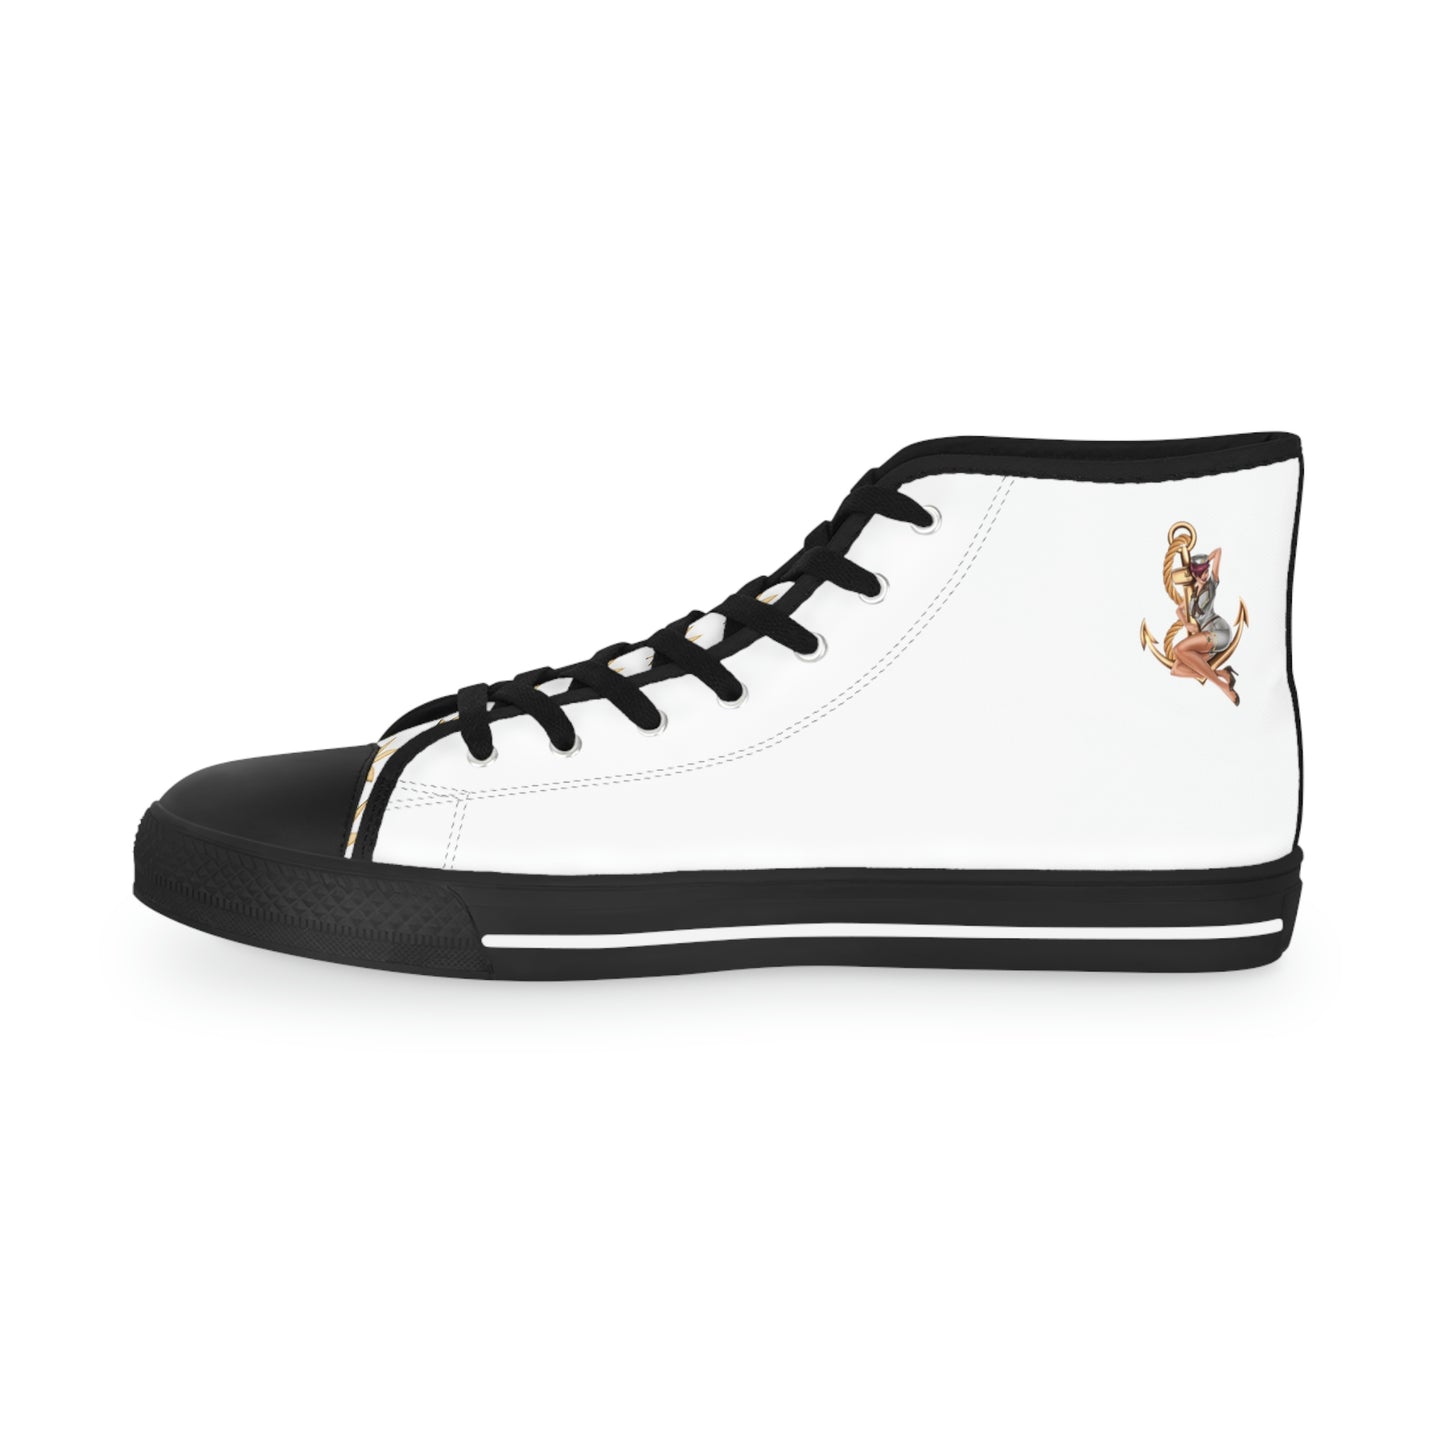 Men's High Top Fashion Sneakers by Queen Mary